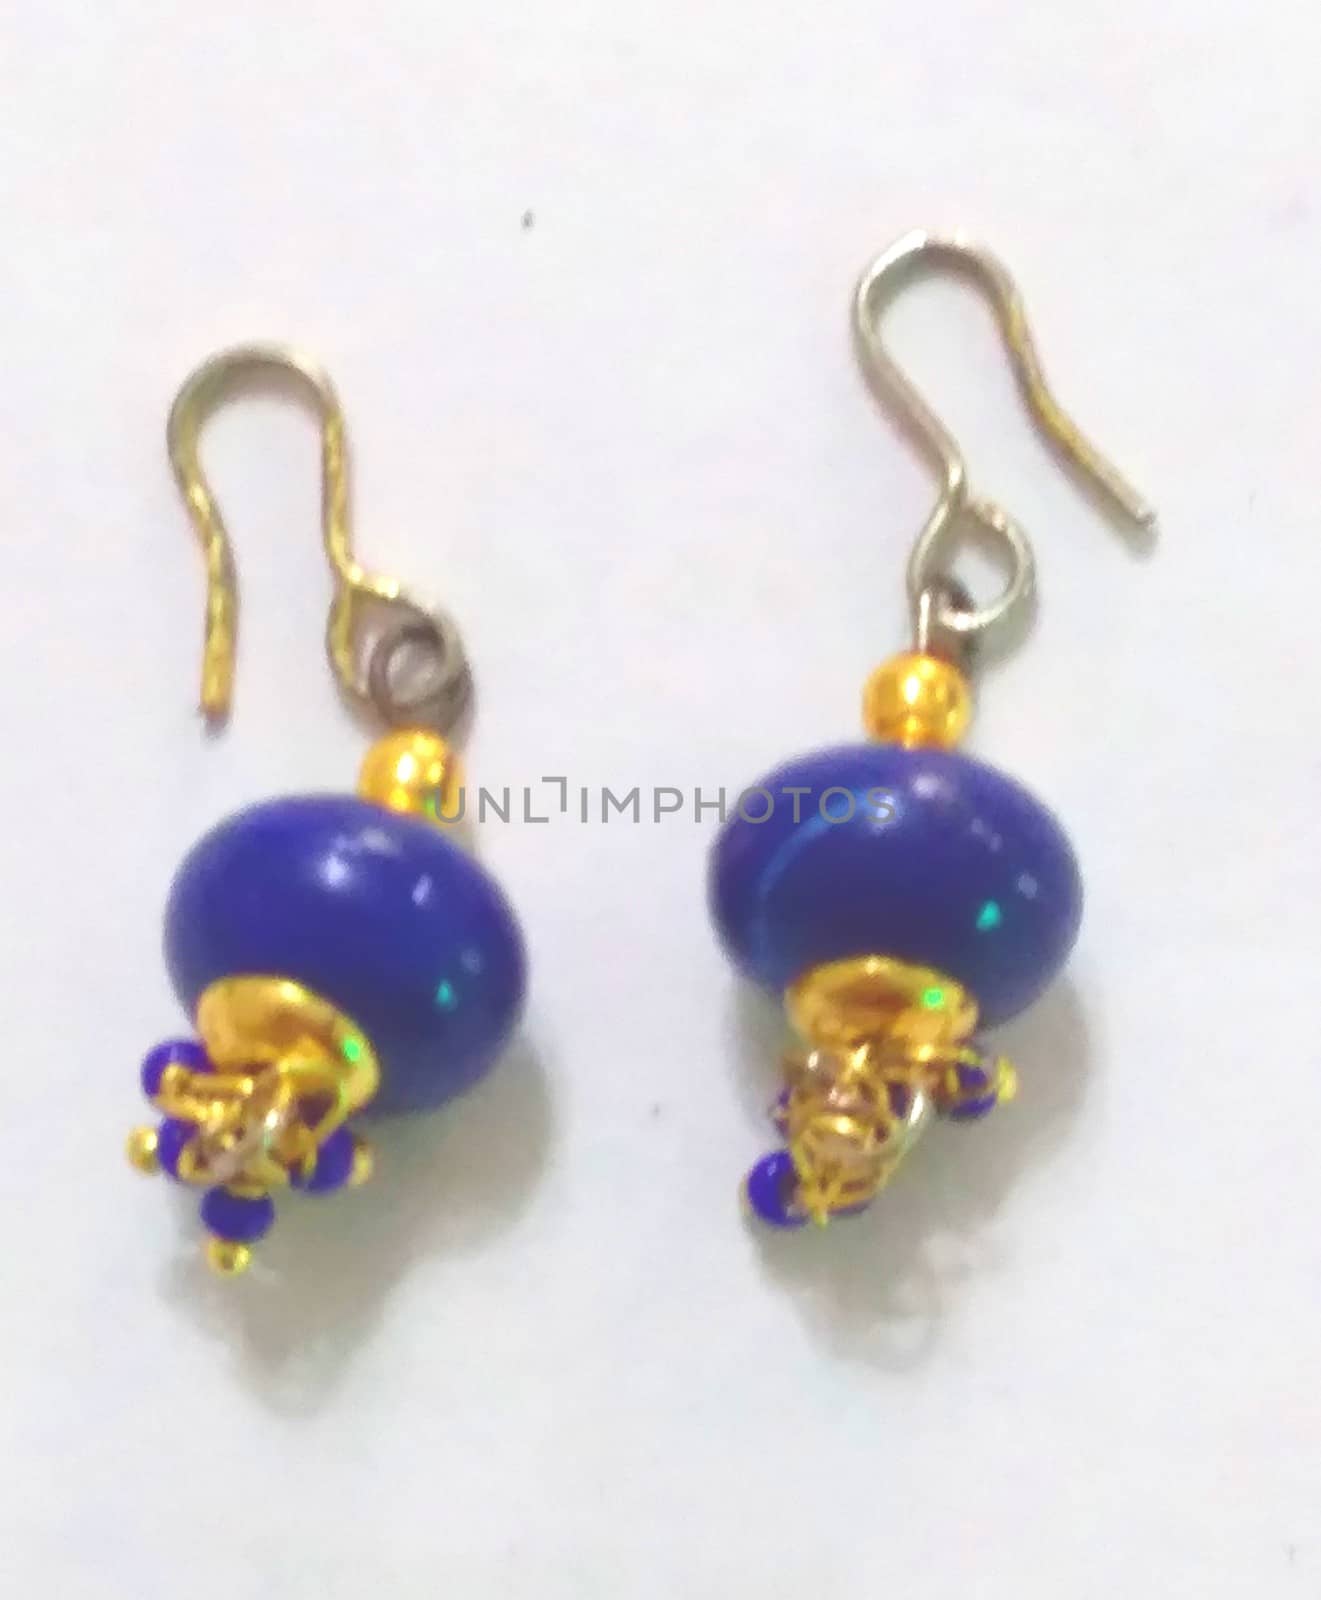 lovely and fashionable blue earrings by gswagh71